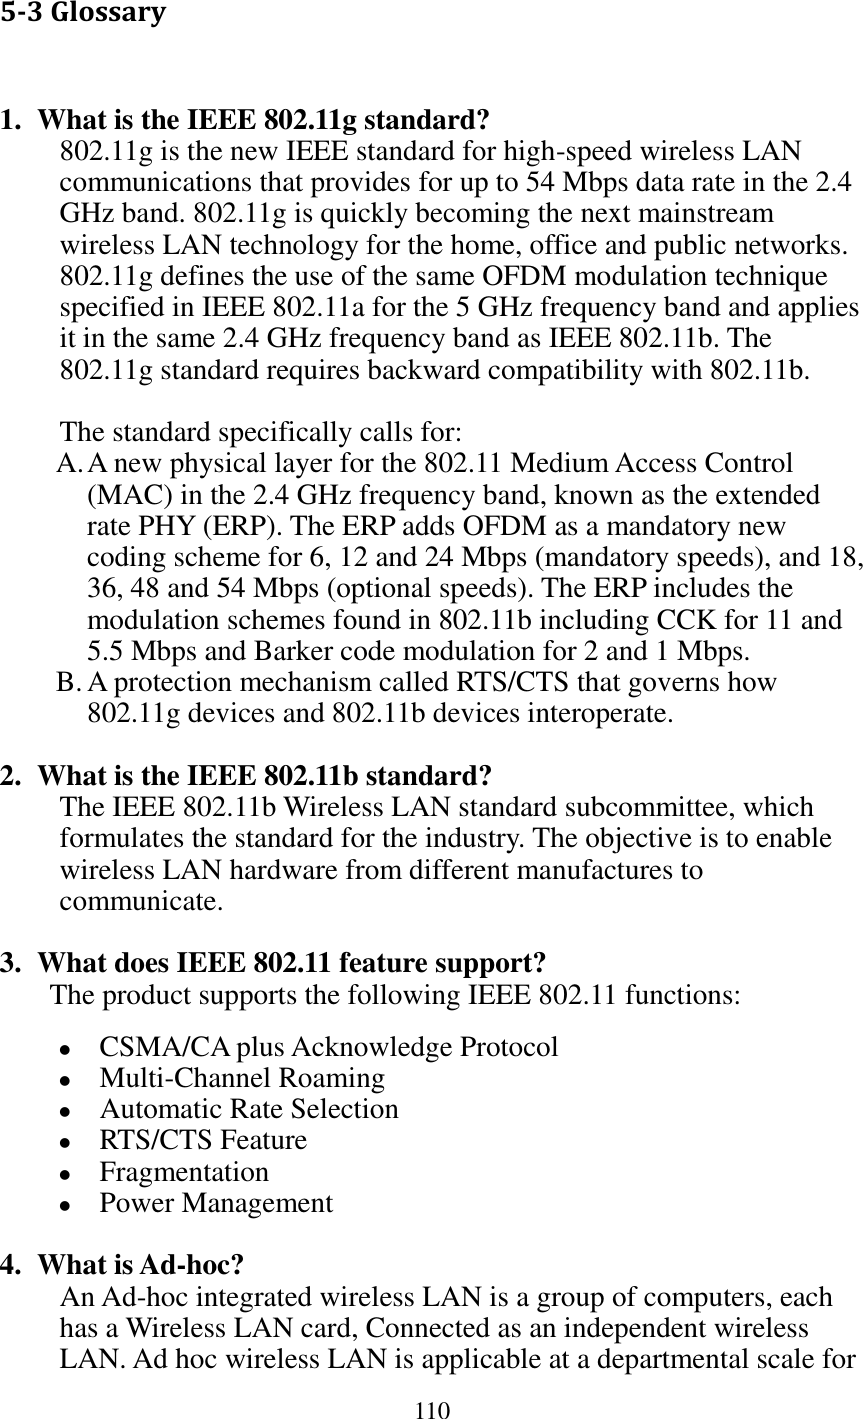 110  5-3 Glossary  1. What is the IEEE 802.11g standard? 802.11g is the new IEEE standard for high-speed wireless LAN communications that provides for up to 54 Mbps data rate in the 2.4 GHz band. 802.11g is quickly becoming the next mainstream wireless LAN technology for the home, office and public networks.   802.11g defines the use of the same OFDM modulation technique specified in IEEE 802.11a for the 5 GHz frequency band and applies it in the same 2.4 GHz frequency band as IEEE 802.11b. The 802.11g standard requires backward compatibility with 802.11b.  The standard specifically calls for:   A. A new physical layer for the 802.11 Medium Access Control (MAC) in the 2.4 GHz frequency band, known as the extended rate PHY (ERP). The ERP adds OFDM as a mandatory new coding scheme for 6, 12 and 24 Mbps (mandatory speeds), and 18, 36, 48 and 54 Mbps (optional speeds). The ERP includes the modulation schemes found in 802.11b including CCK for 11 and 5.5 Mbps and Barker code modulation for 2 and 1 Mbps. B. A protection mechanism called RTS/CTS that governs how 802.11g devices and 802.11b devices interoperate.  2. What is the IEEE 802.11b standard? The IEEE 802.11b Wireless LAN standard subcommittee, which formulates the standard for the industry. The objective is to enable wireless LAN hardware from different manufactures to communicate.  3. What does IEEE 802.11 feature support? The product supports the following IEEE 802.11 functions:  CSMA/CA plus Acknowledge Protocol  Multi-Channel Roaming  Automatic Rate Selection  RTS/CTS Feature  Fragmentation  Power Management  4. What is Ad-hoc? An Ad-hoc integrated wireless LAN is a group of computers, each has a Wireless LAN card, Connected as an independent wireless LAN. Ad hoc wireless LAN is applicable at a departmental scale for 